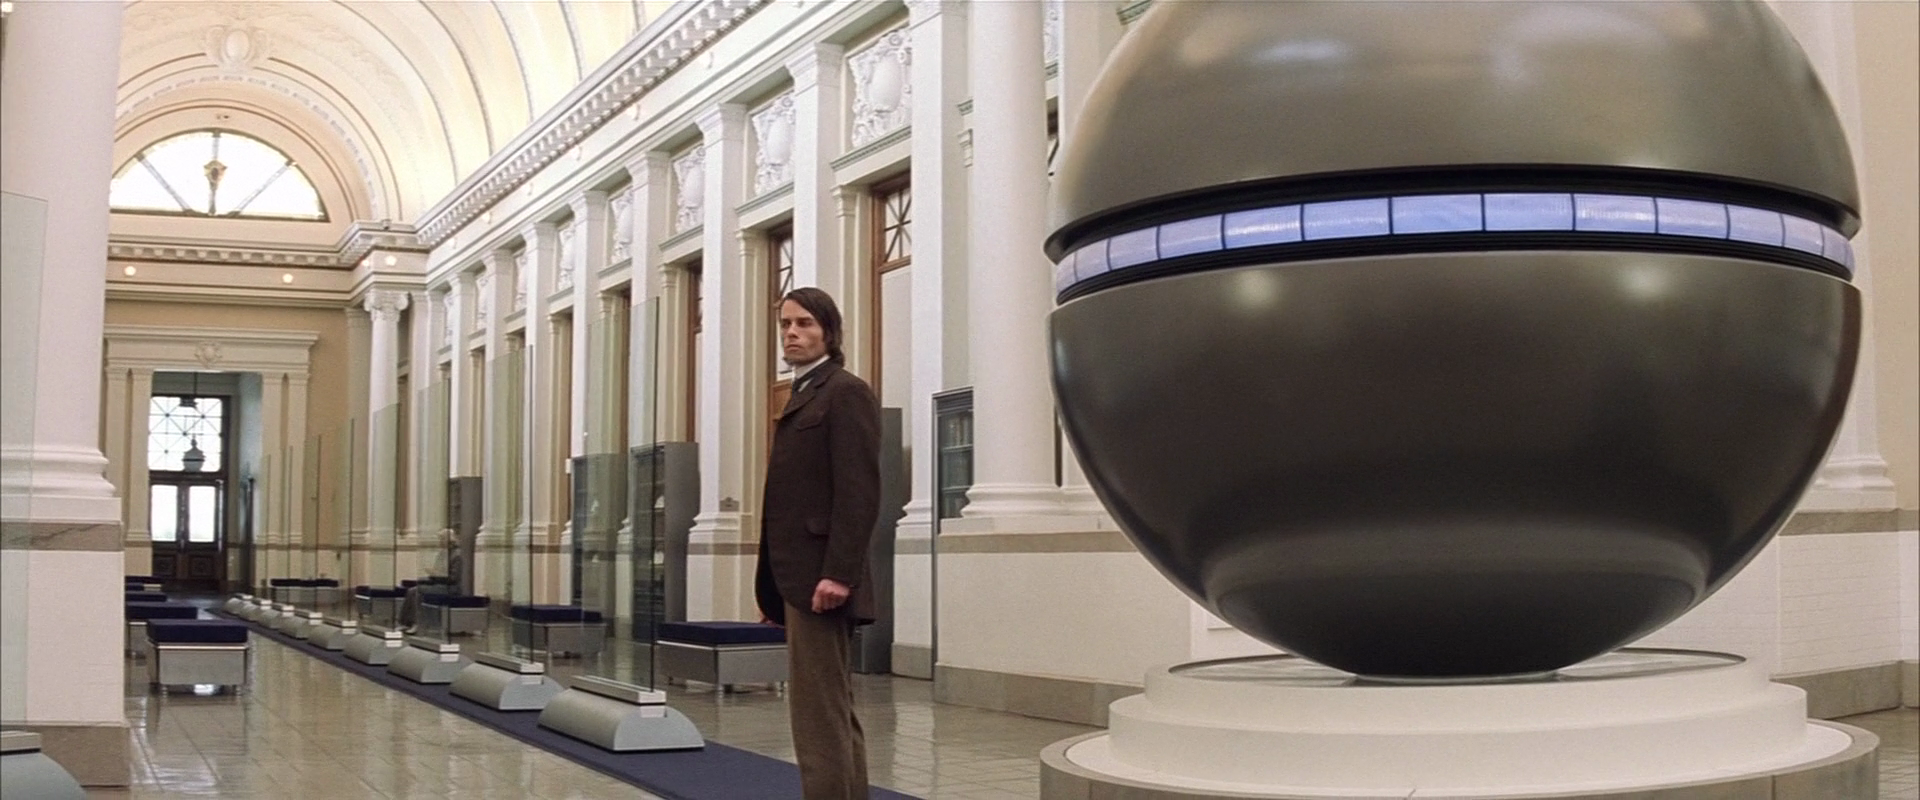 Movie The Time Machine (2002) HD Wallpaper | Background Image